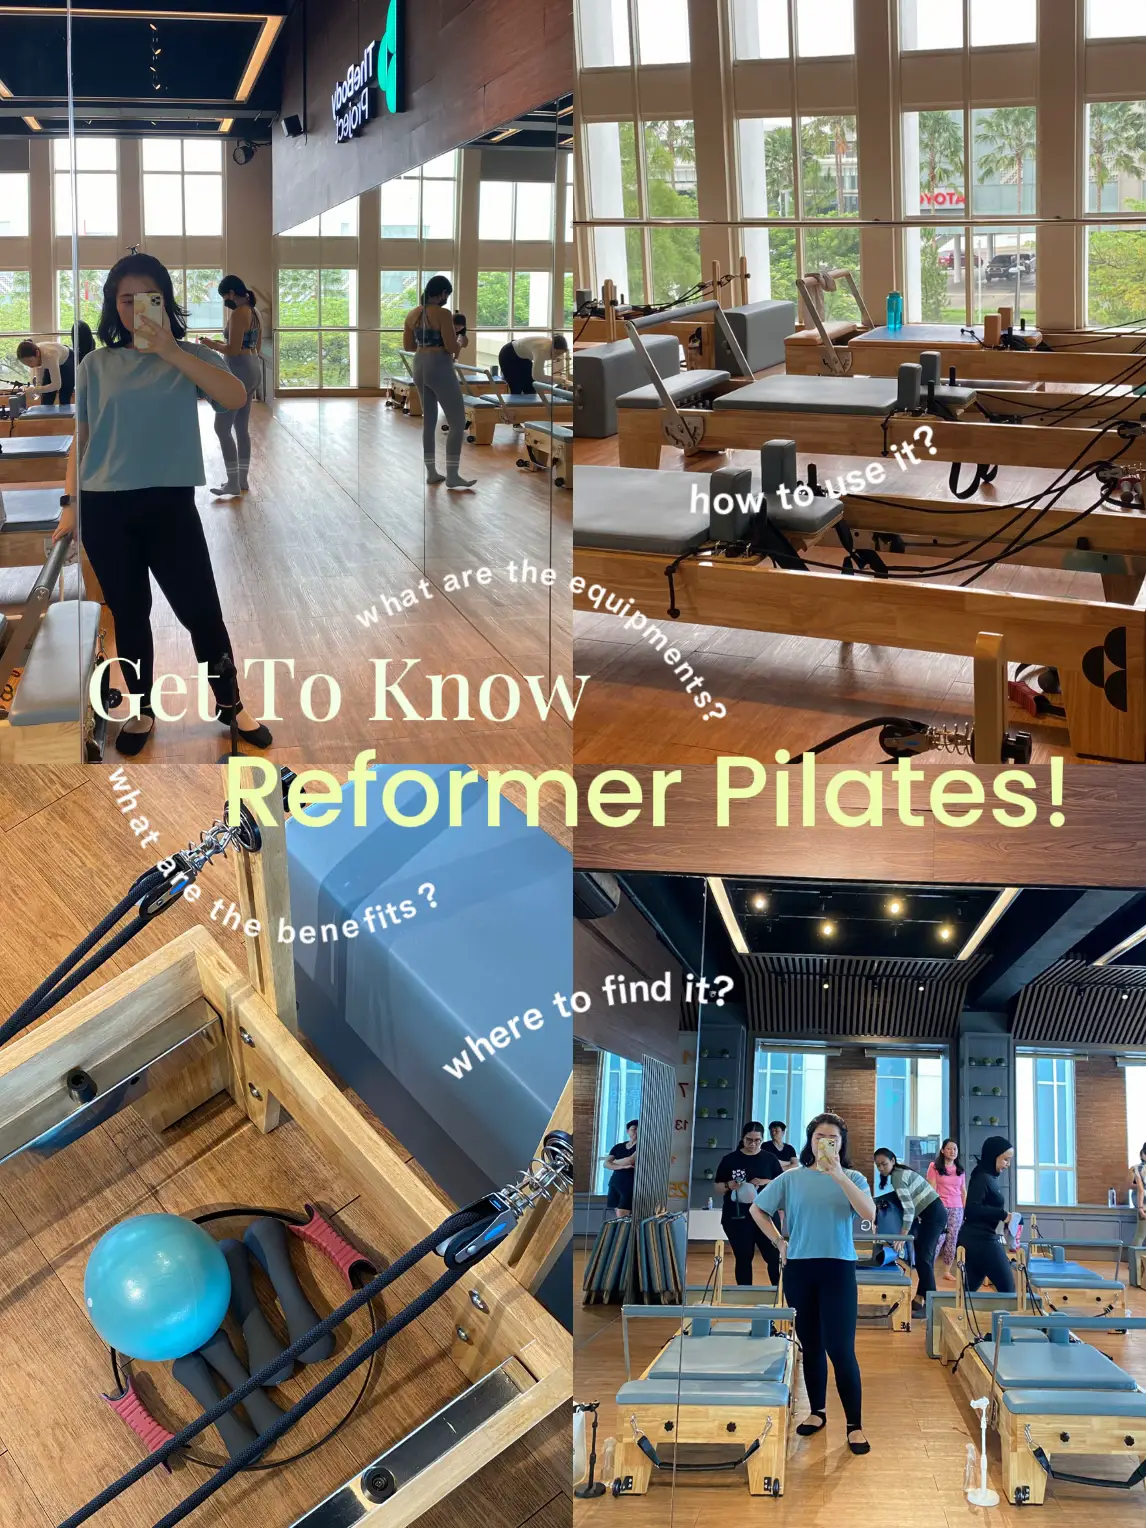 What To Wear To Reformer Pilates Class